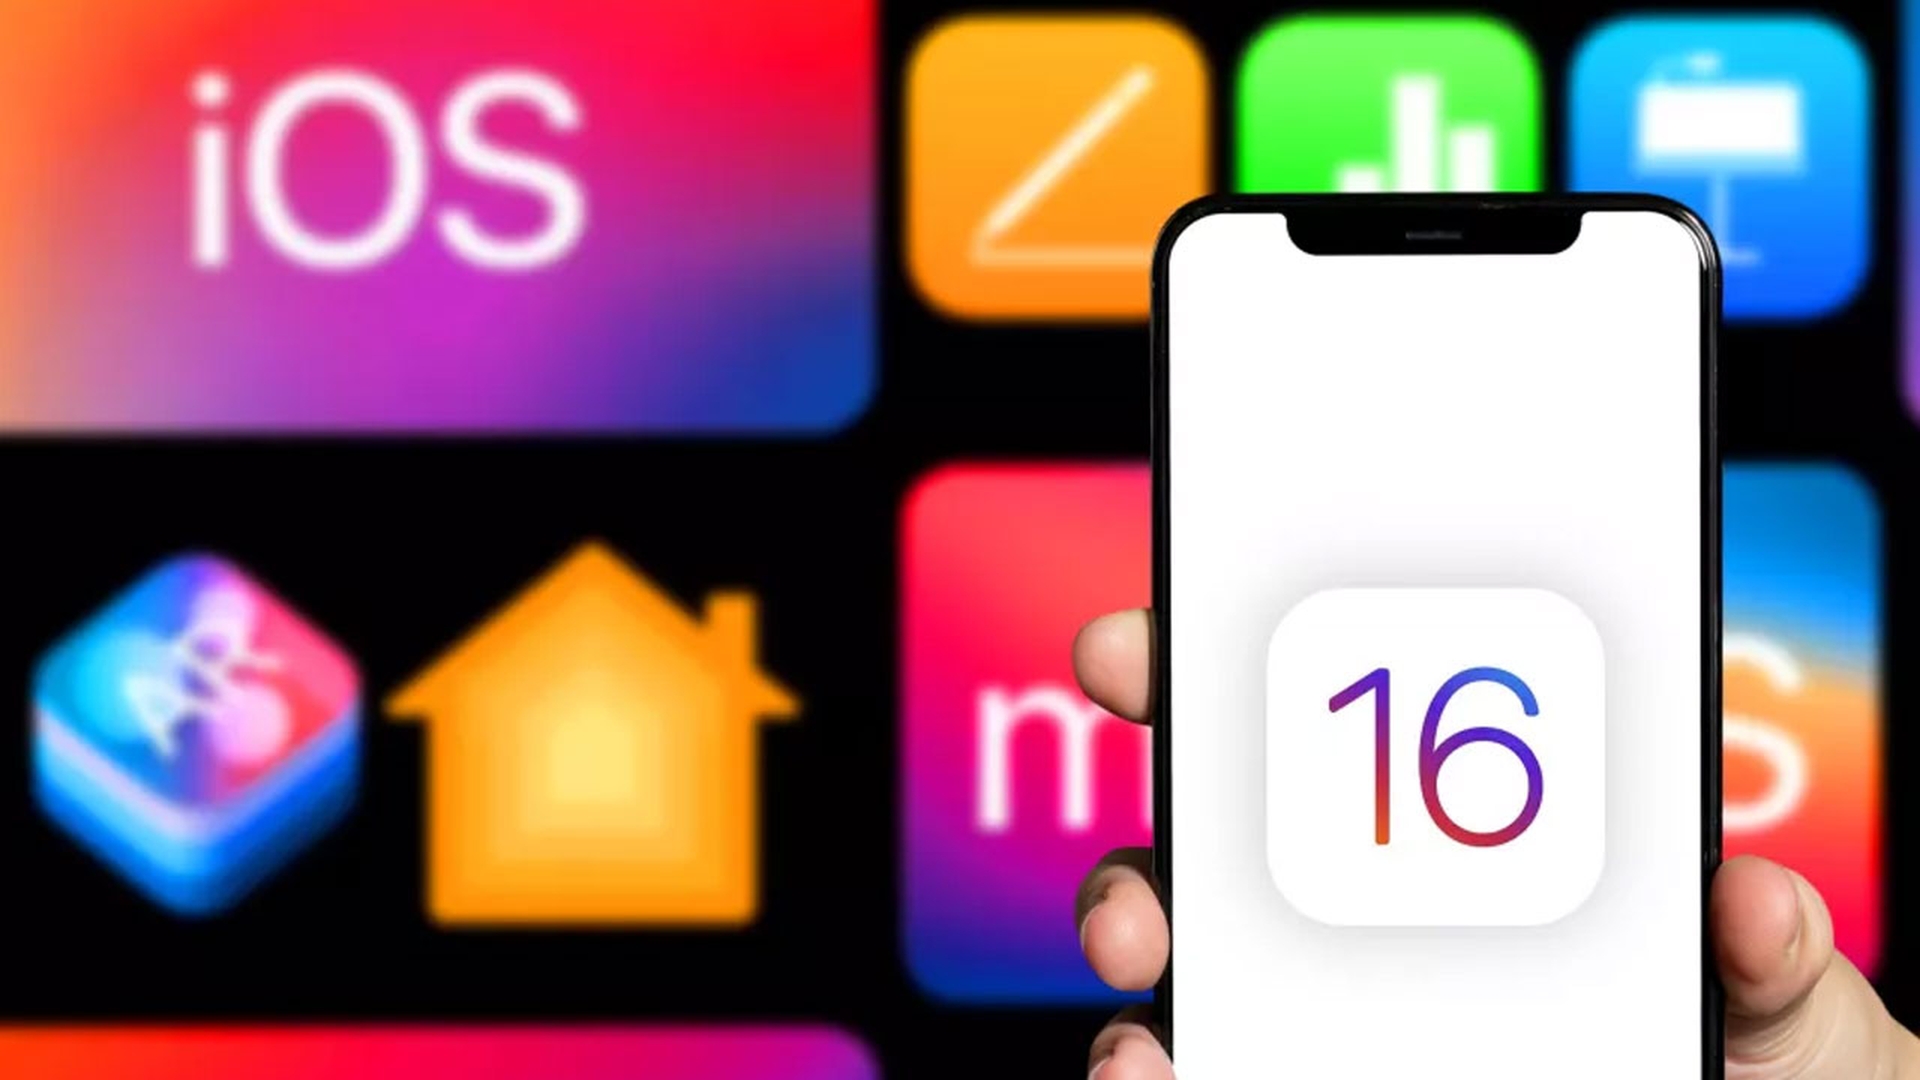 In this article, we are going to take a look at how to unsend iMessage iOS 16, so you can do so as soon as it rolls out.